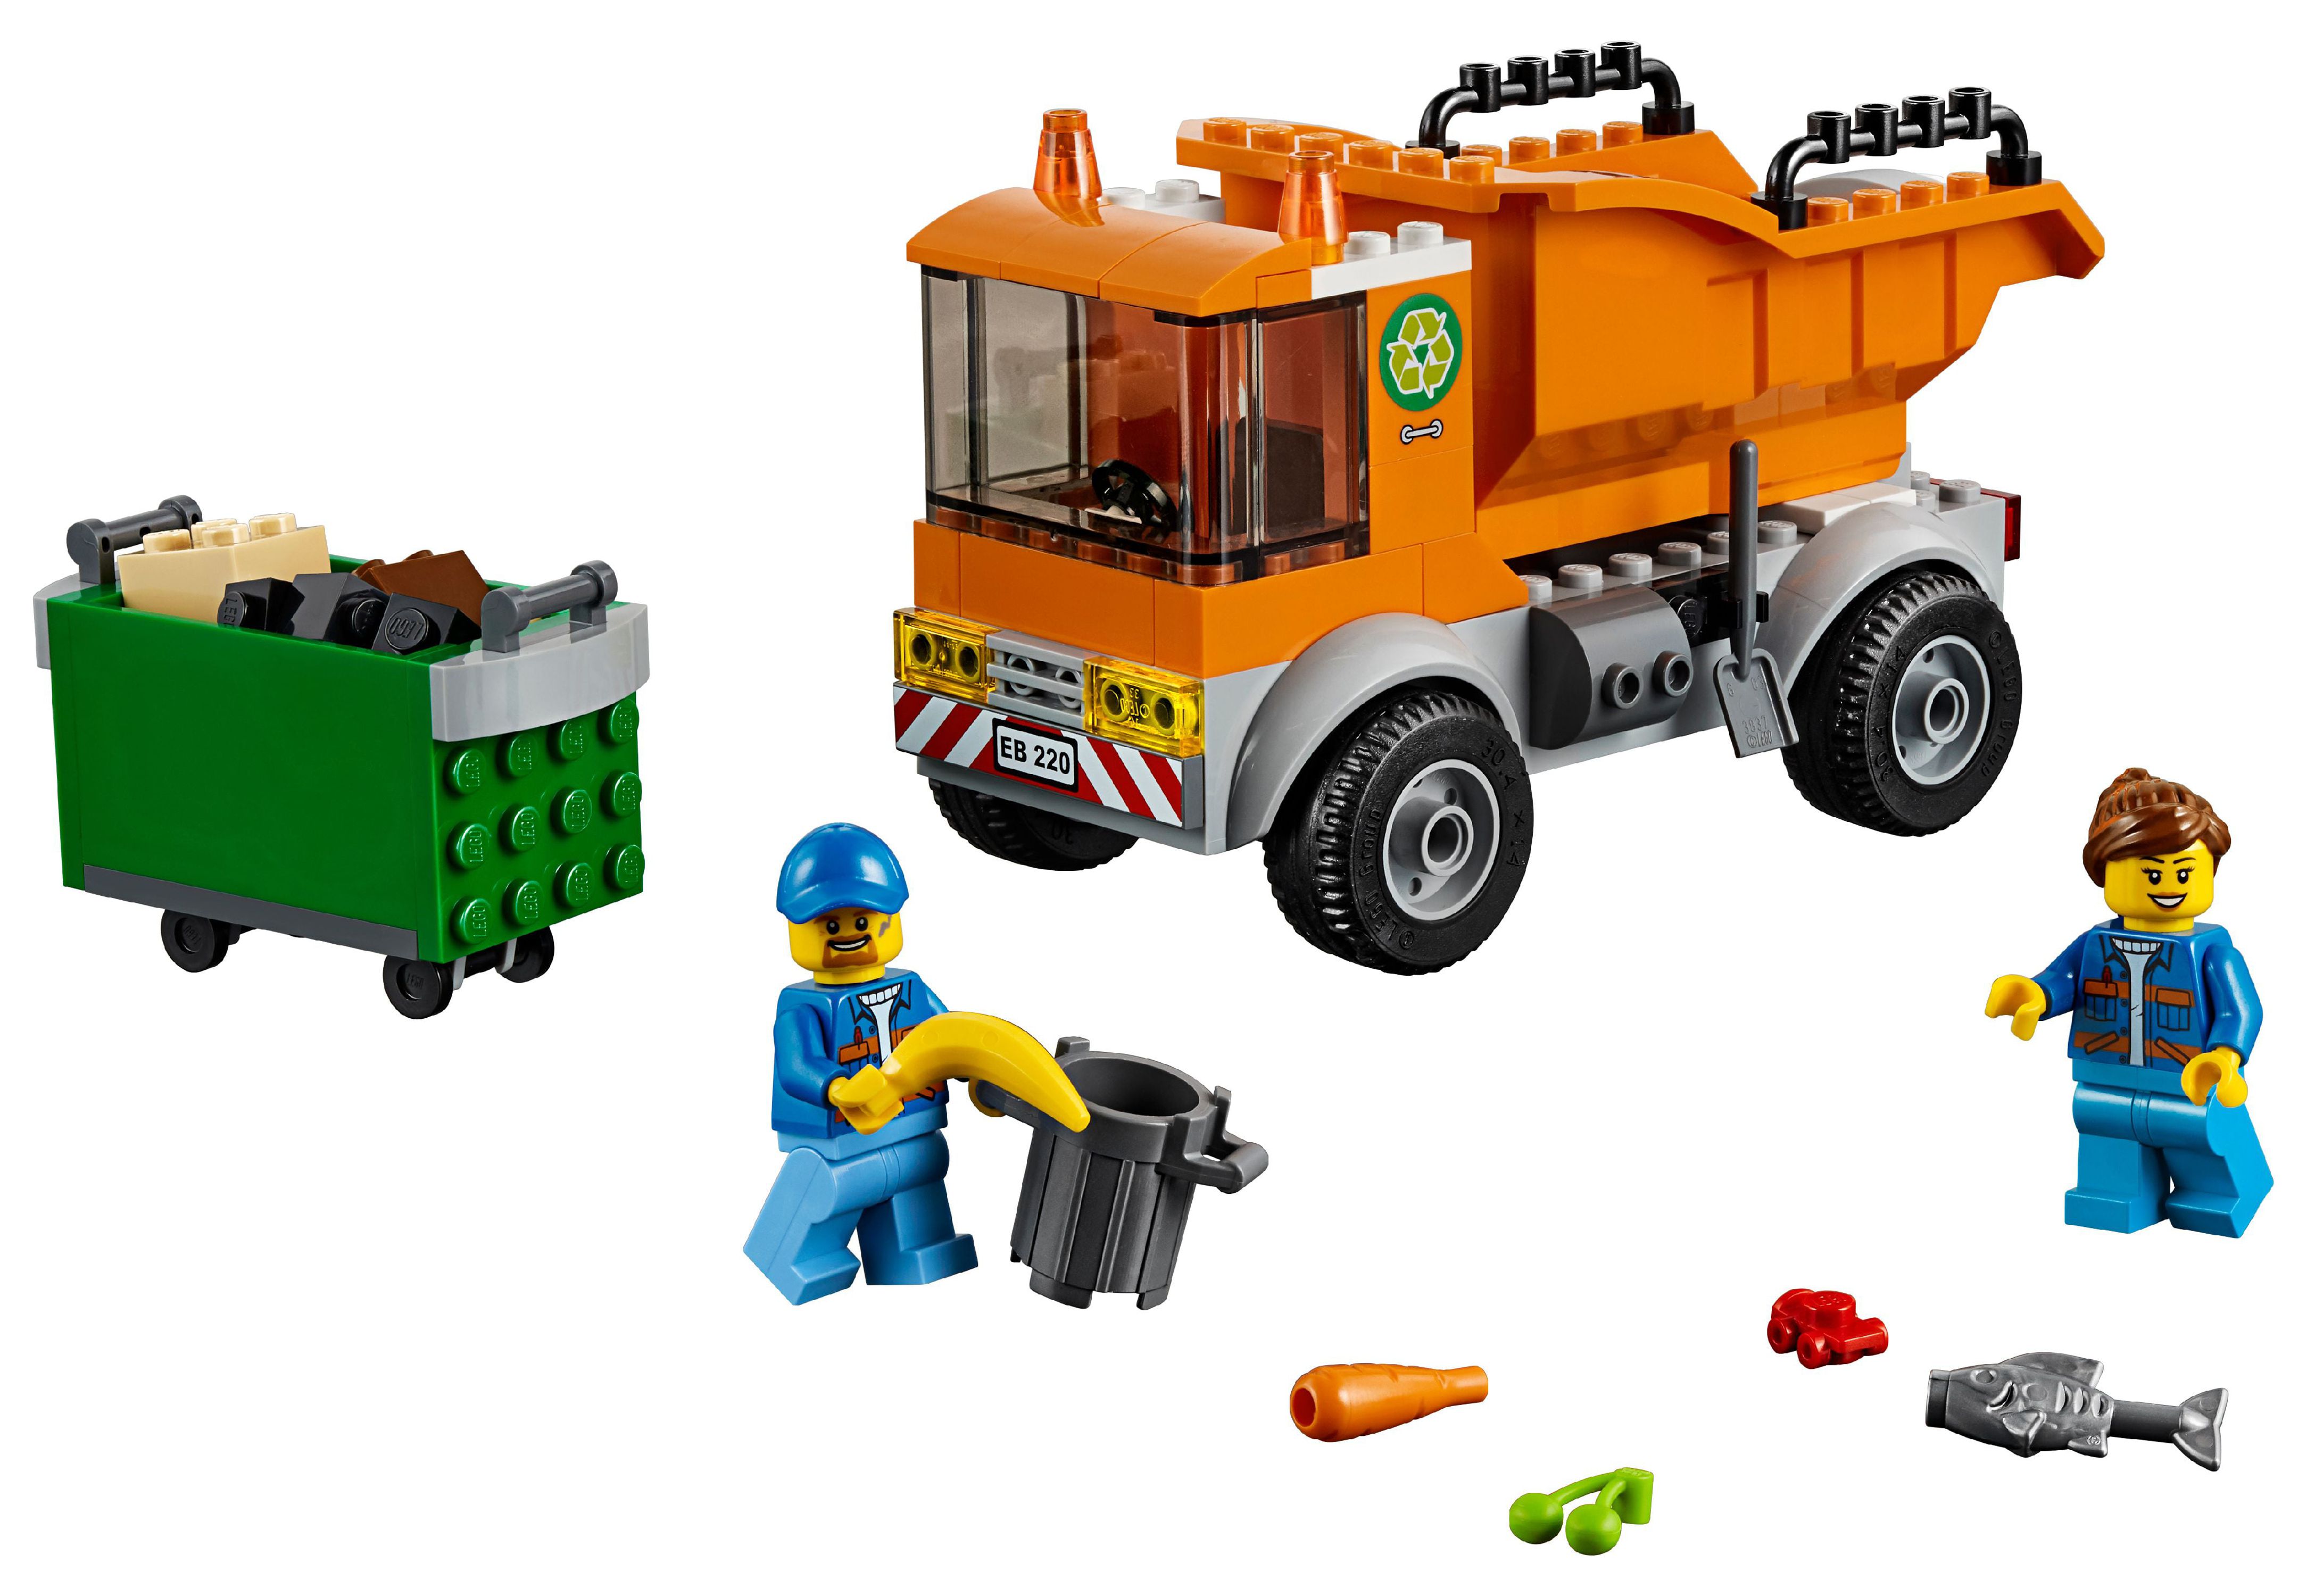 LEGO City Great Vehicles Garbage Truck 60220 - image 3 of 8